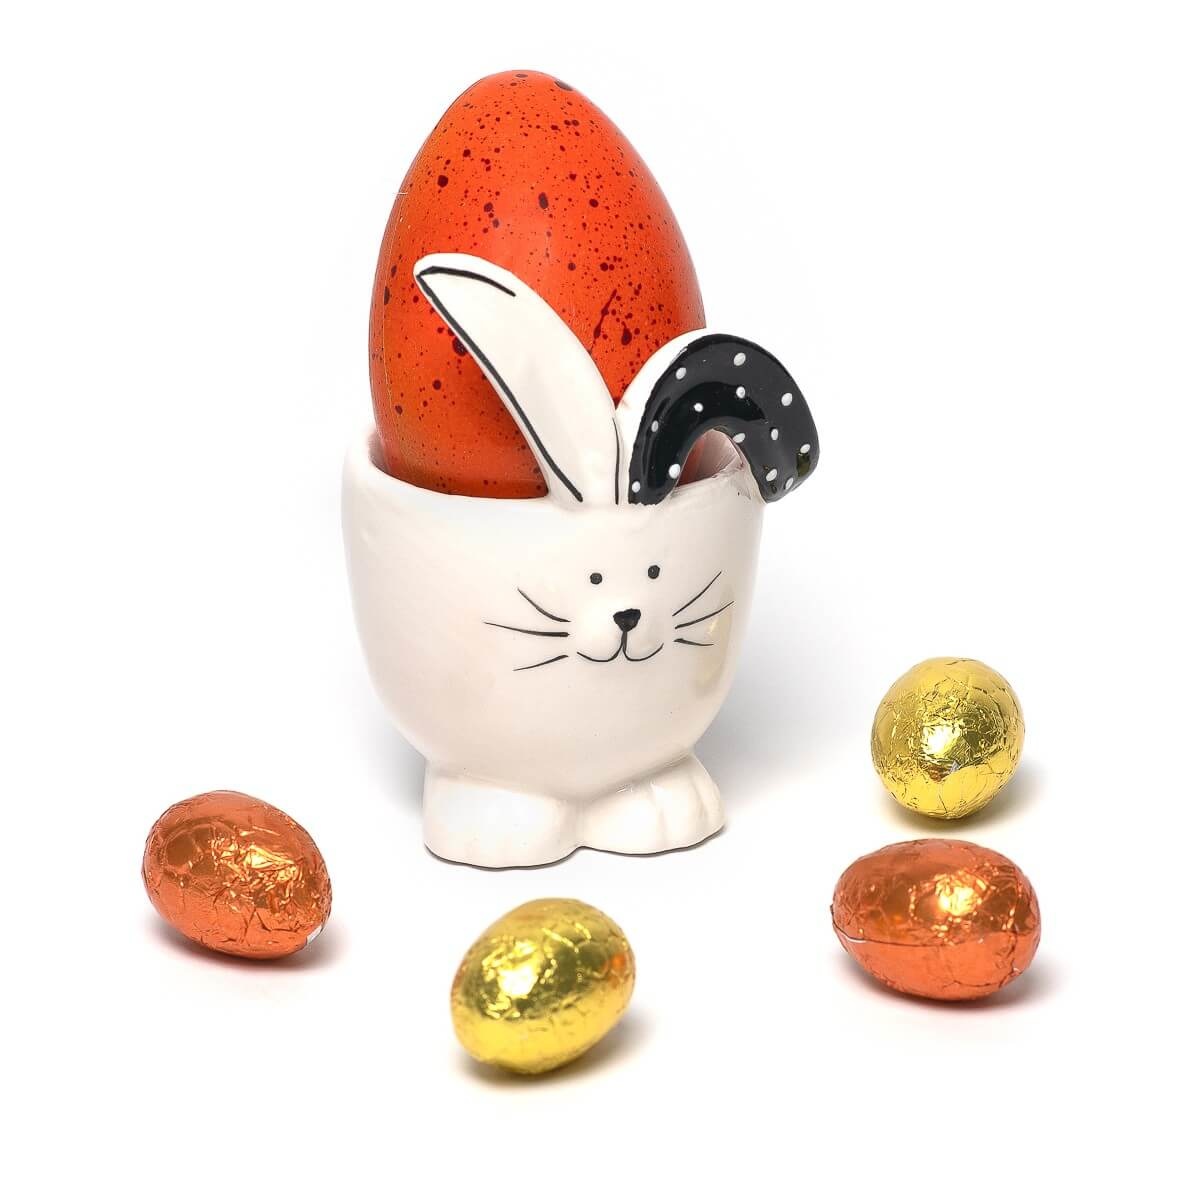 Ceramic bunny egg cup with chocolate egg 90 Grs (milk chocolate)